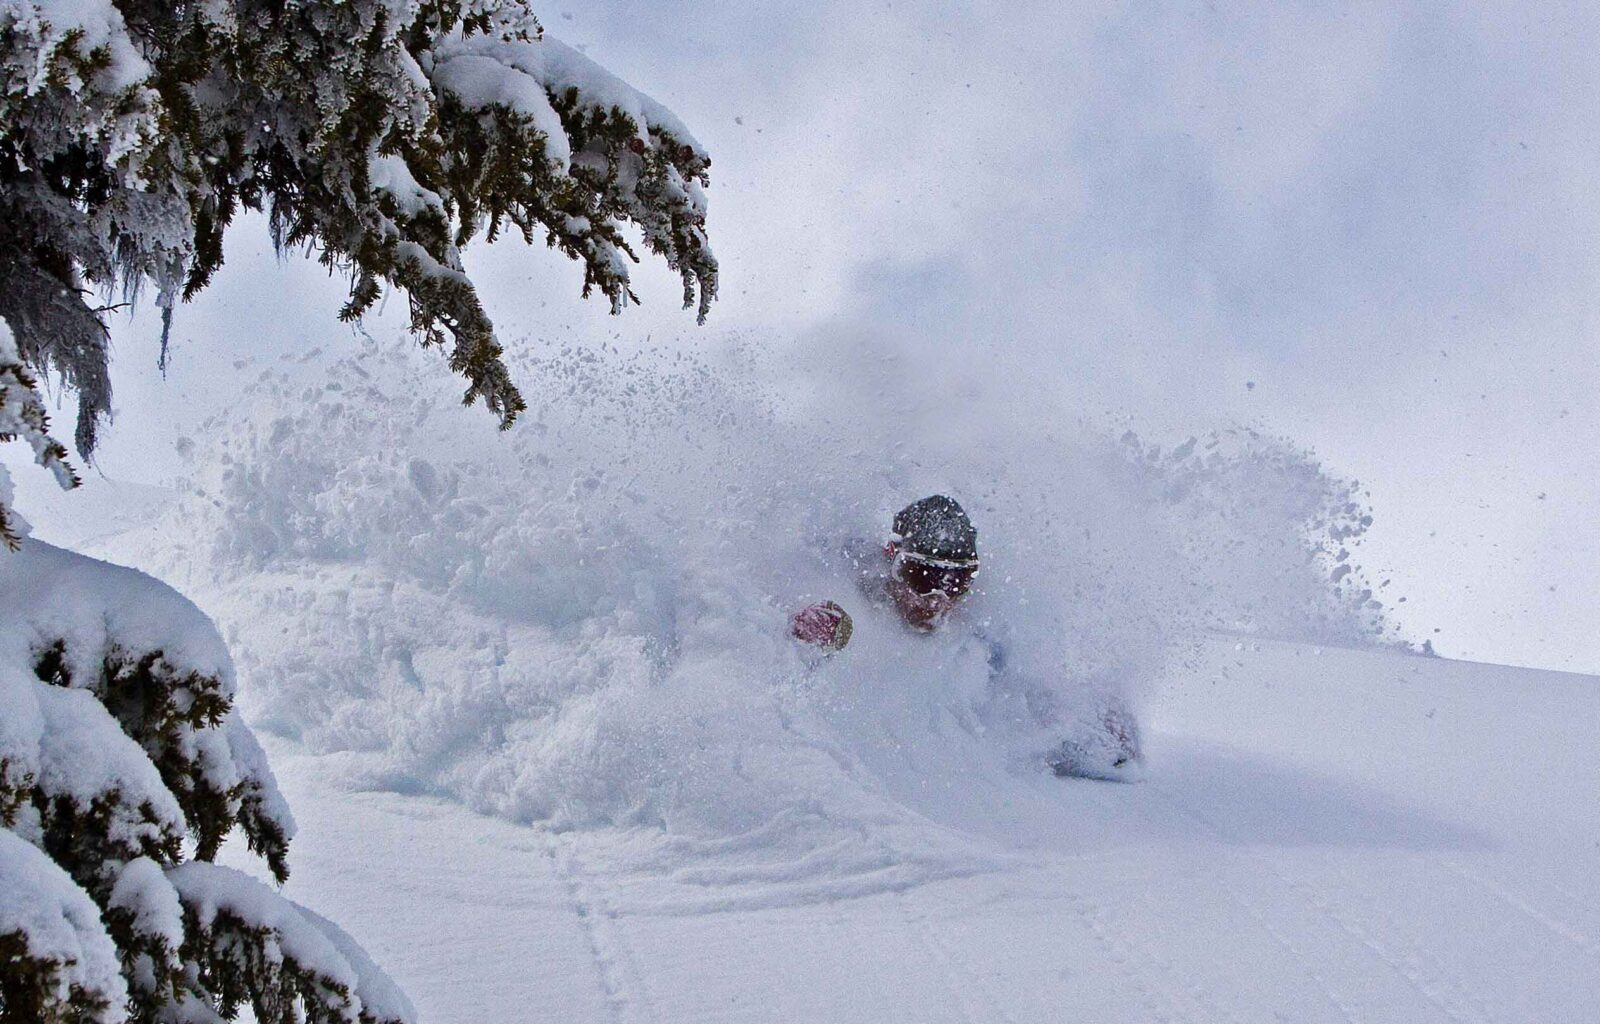 skiier going down in the powder snow in Canada